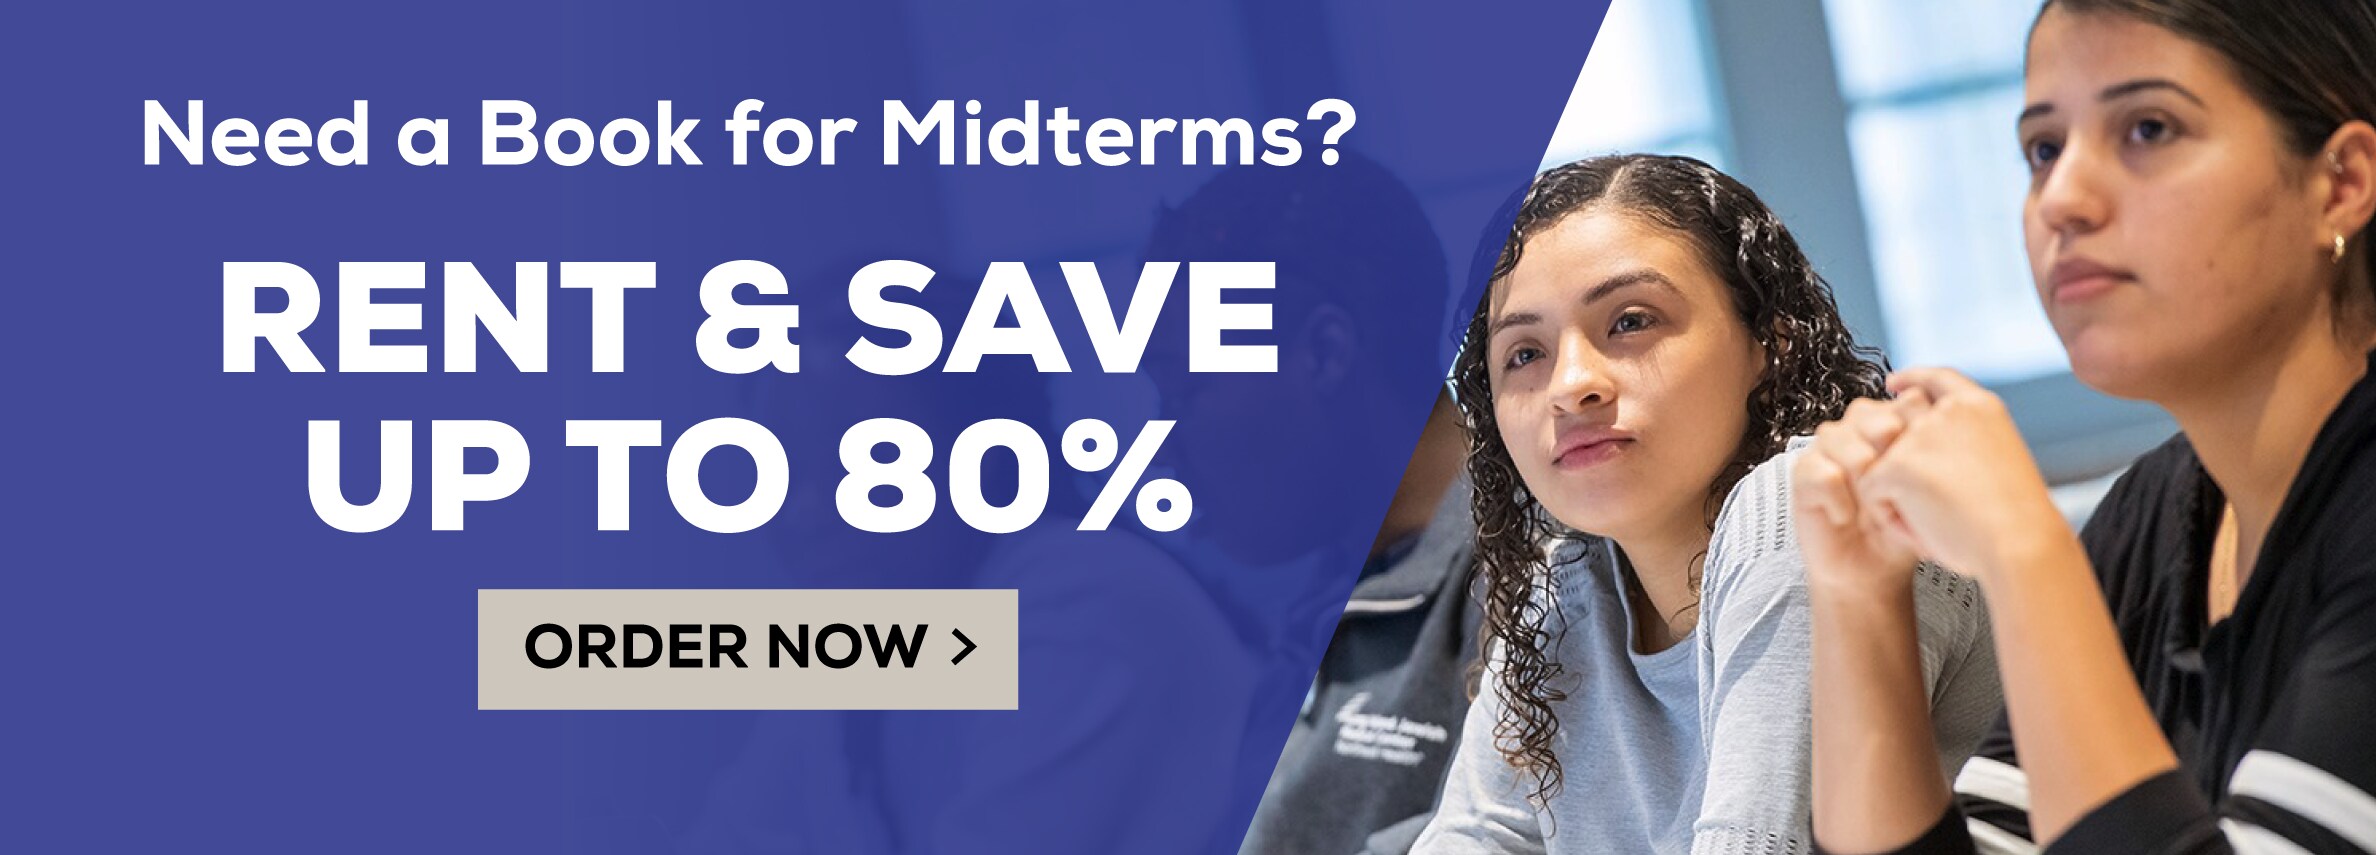 Need a book for Midterms? Rent and save up to 80%. Order Now.